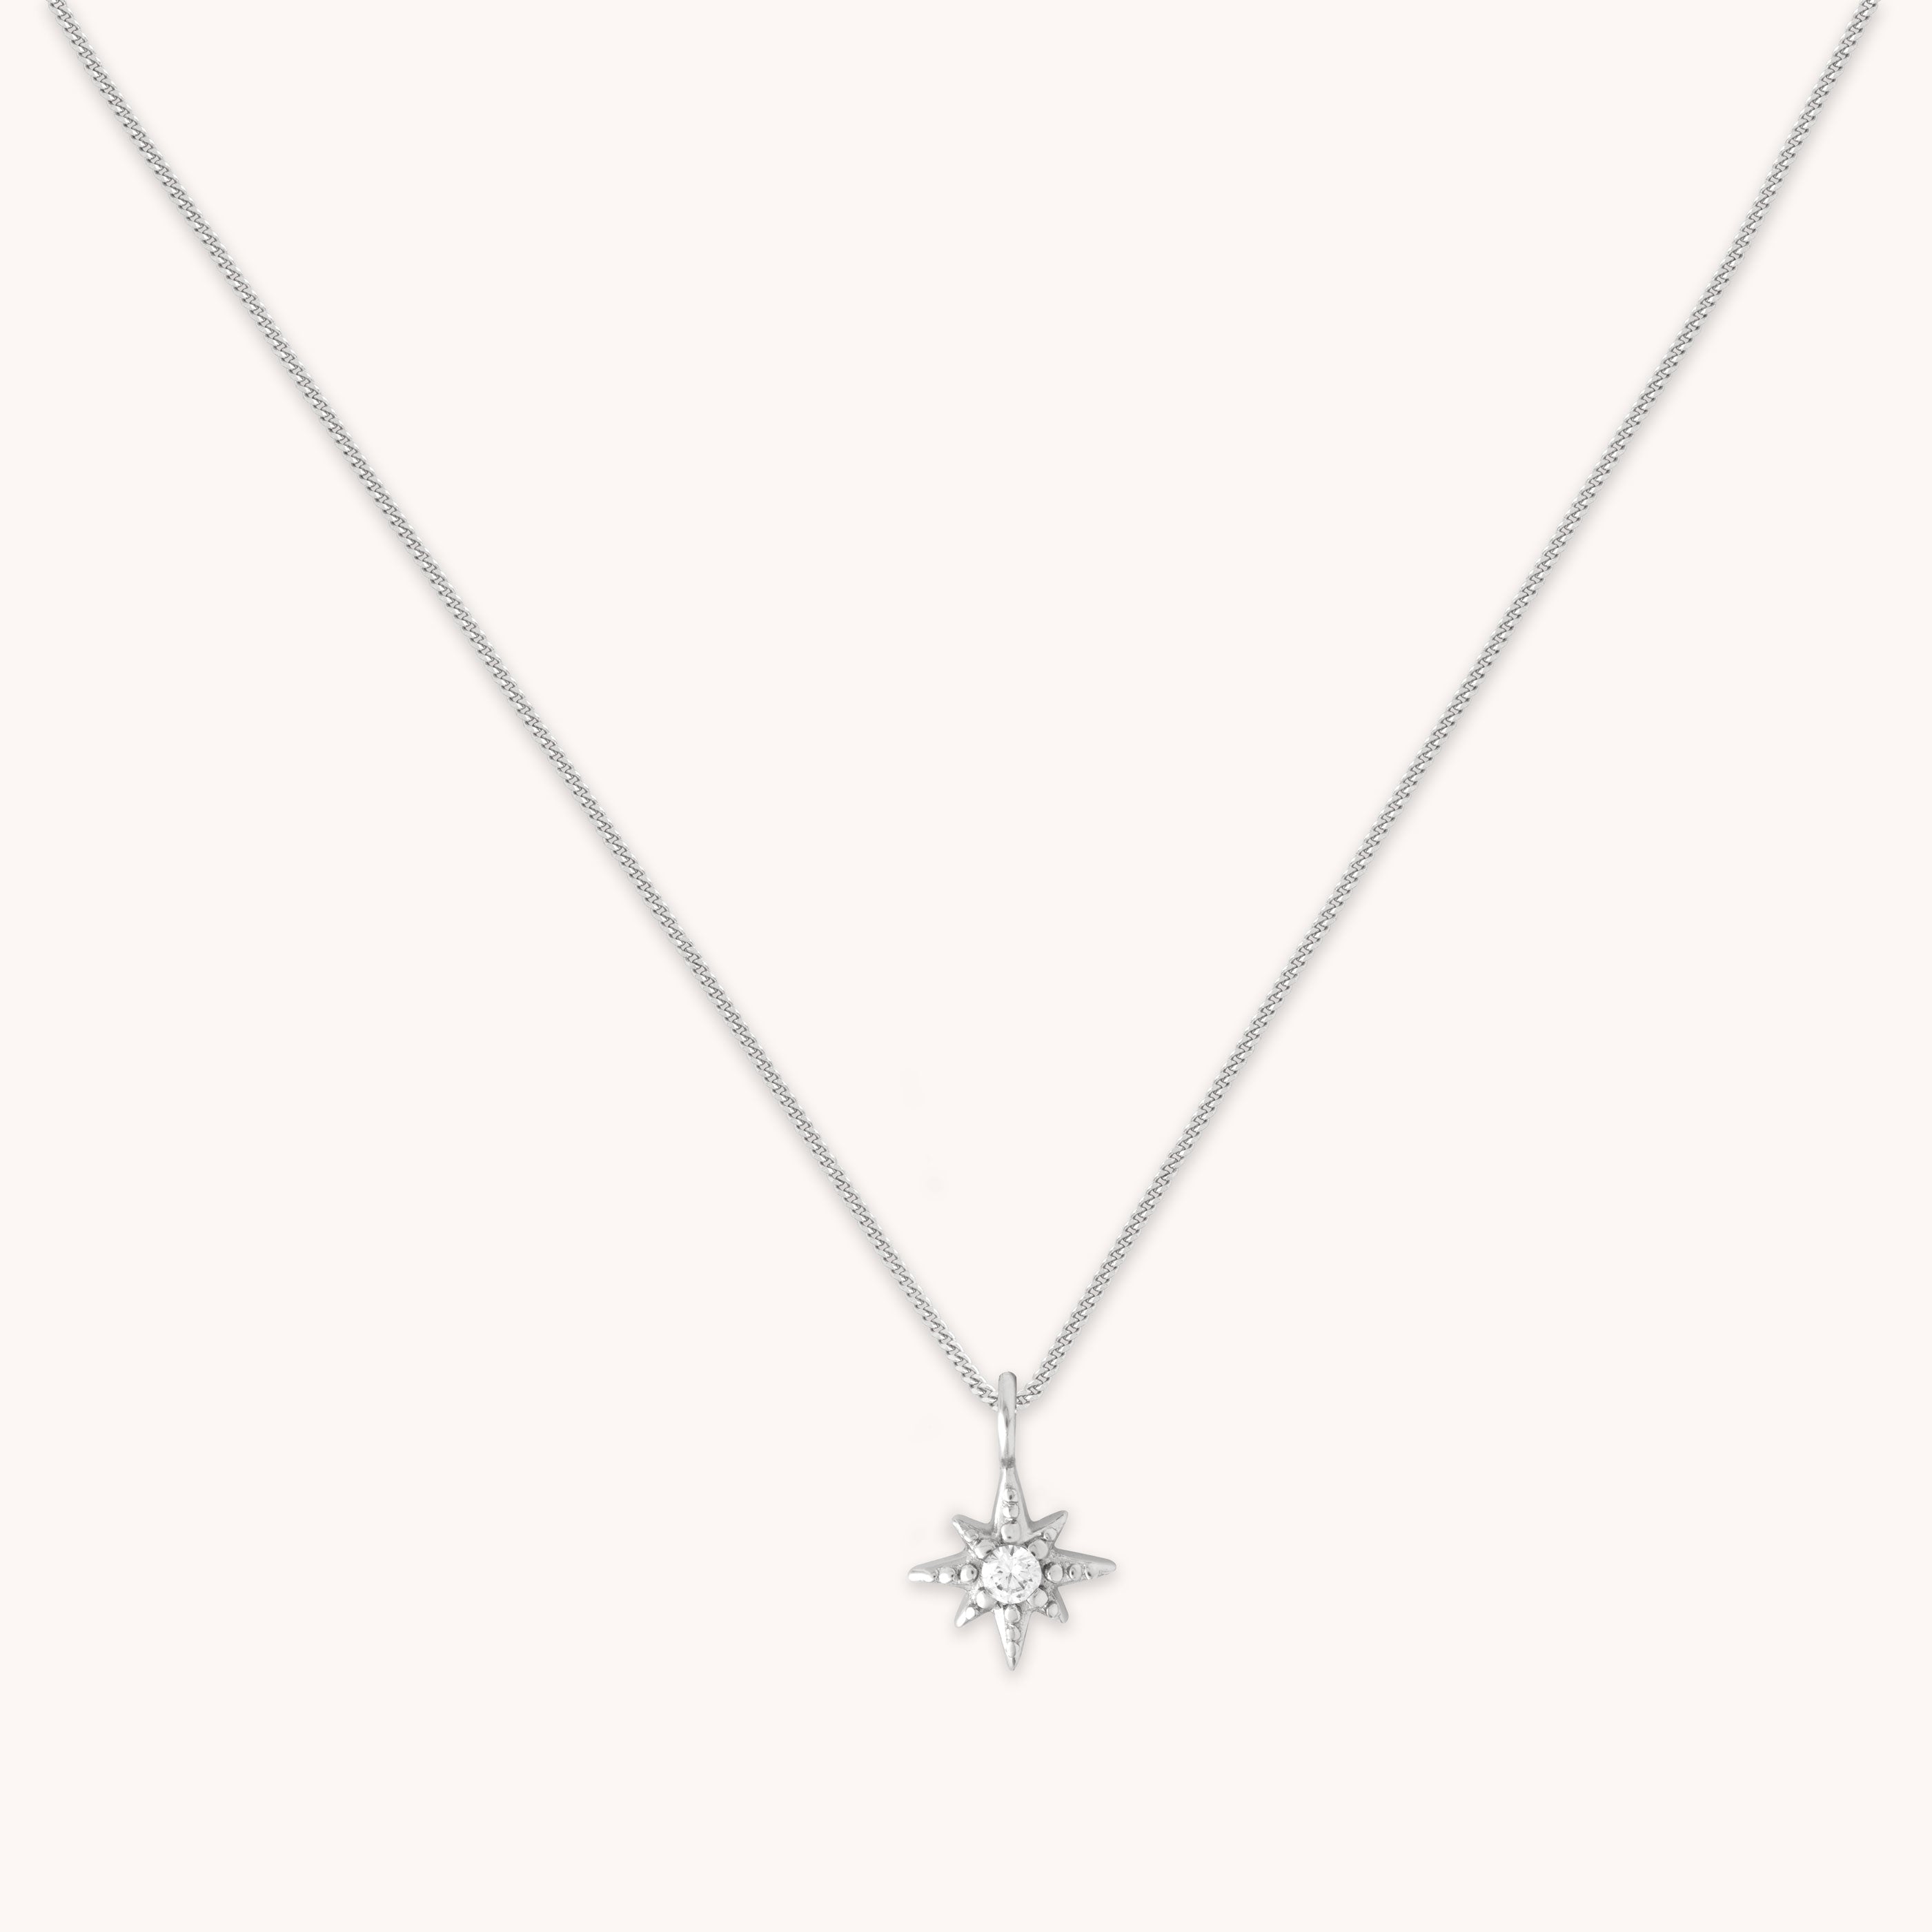 Twilight Star Pendant Necklace in Silver